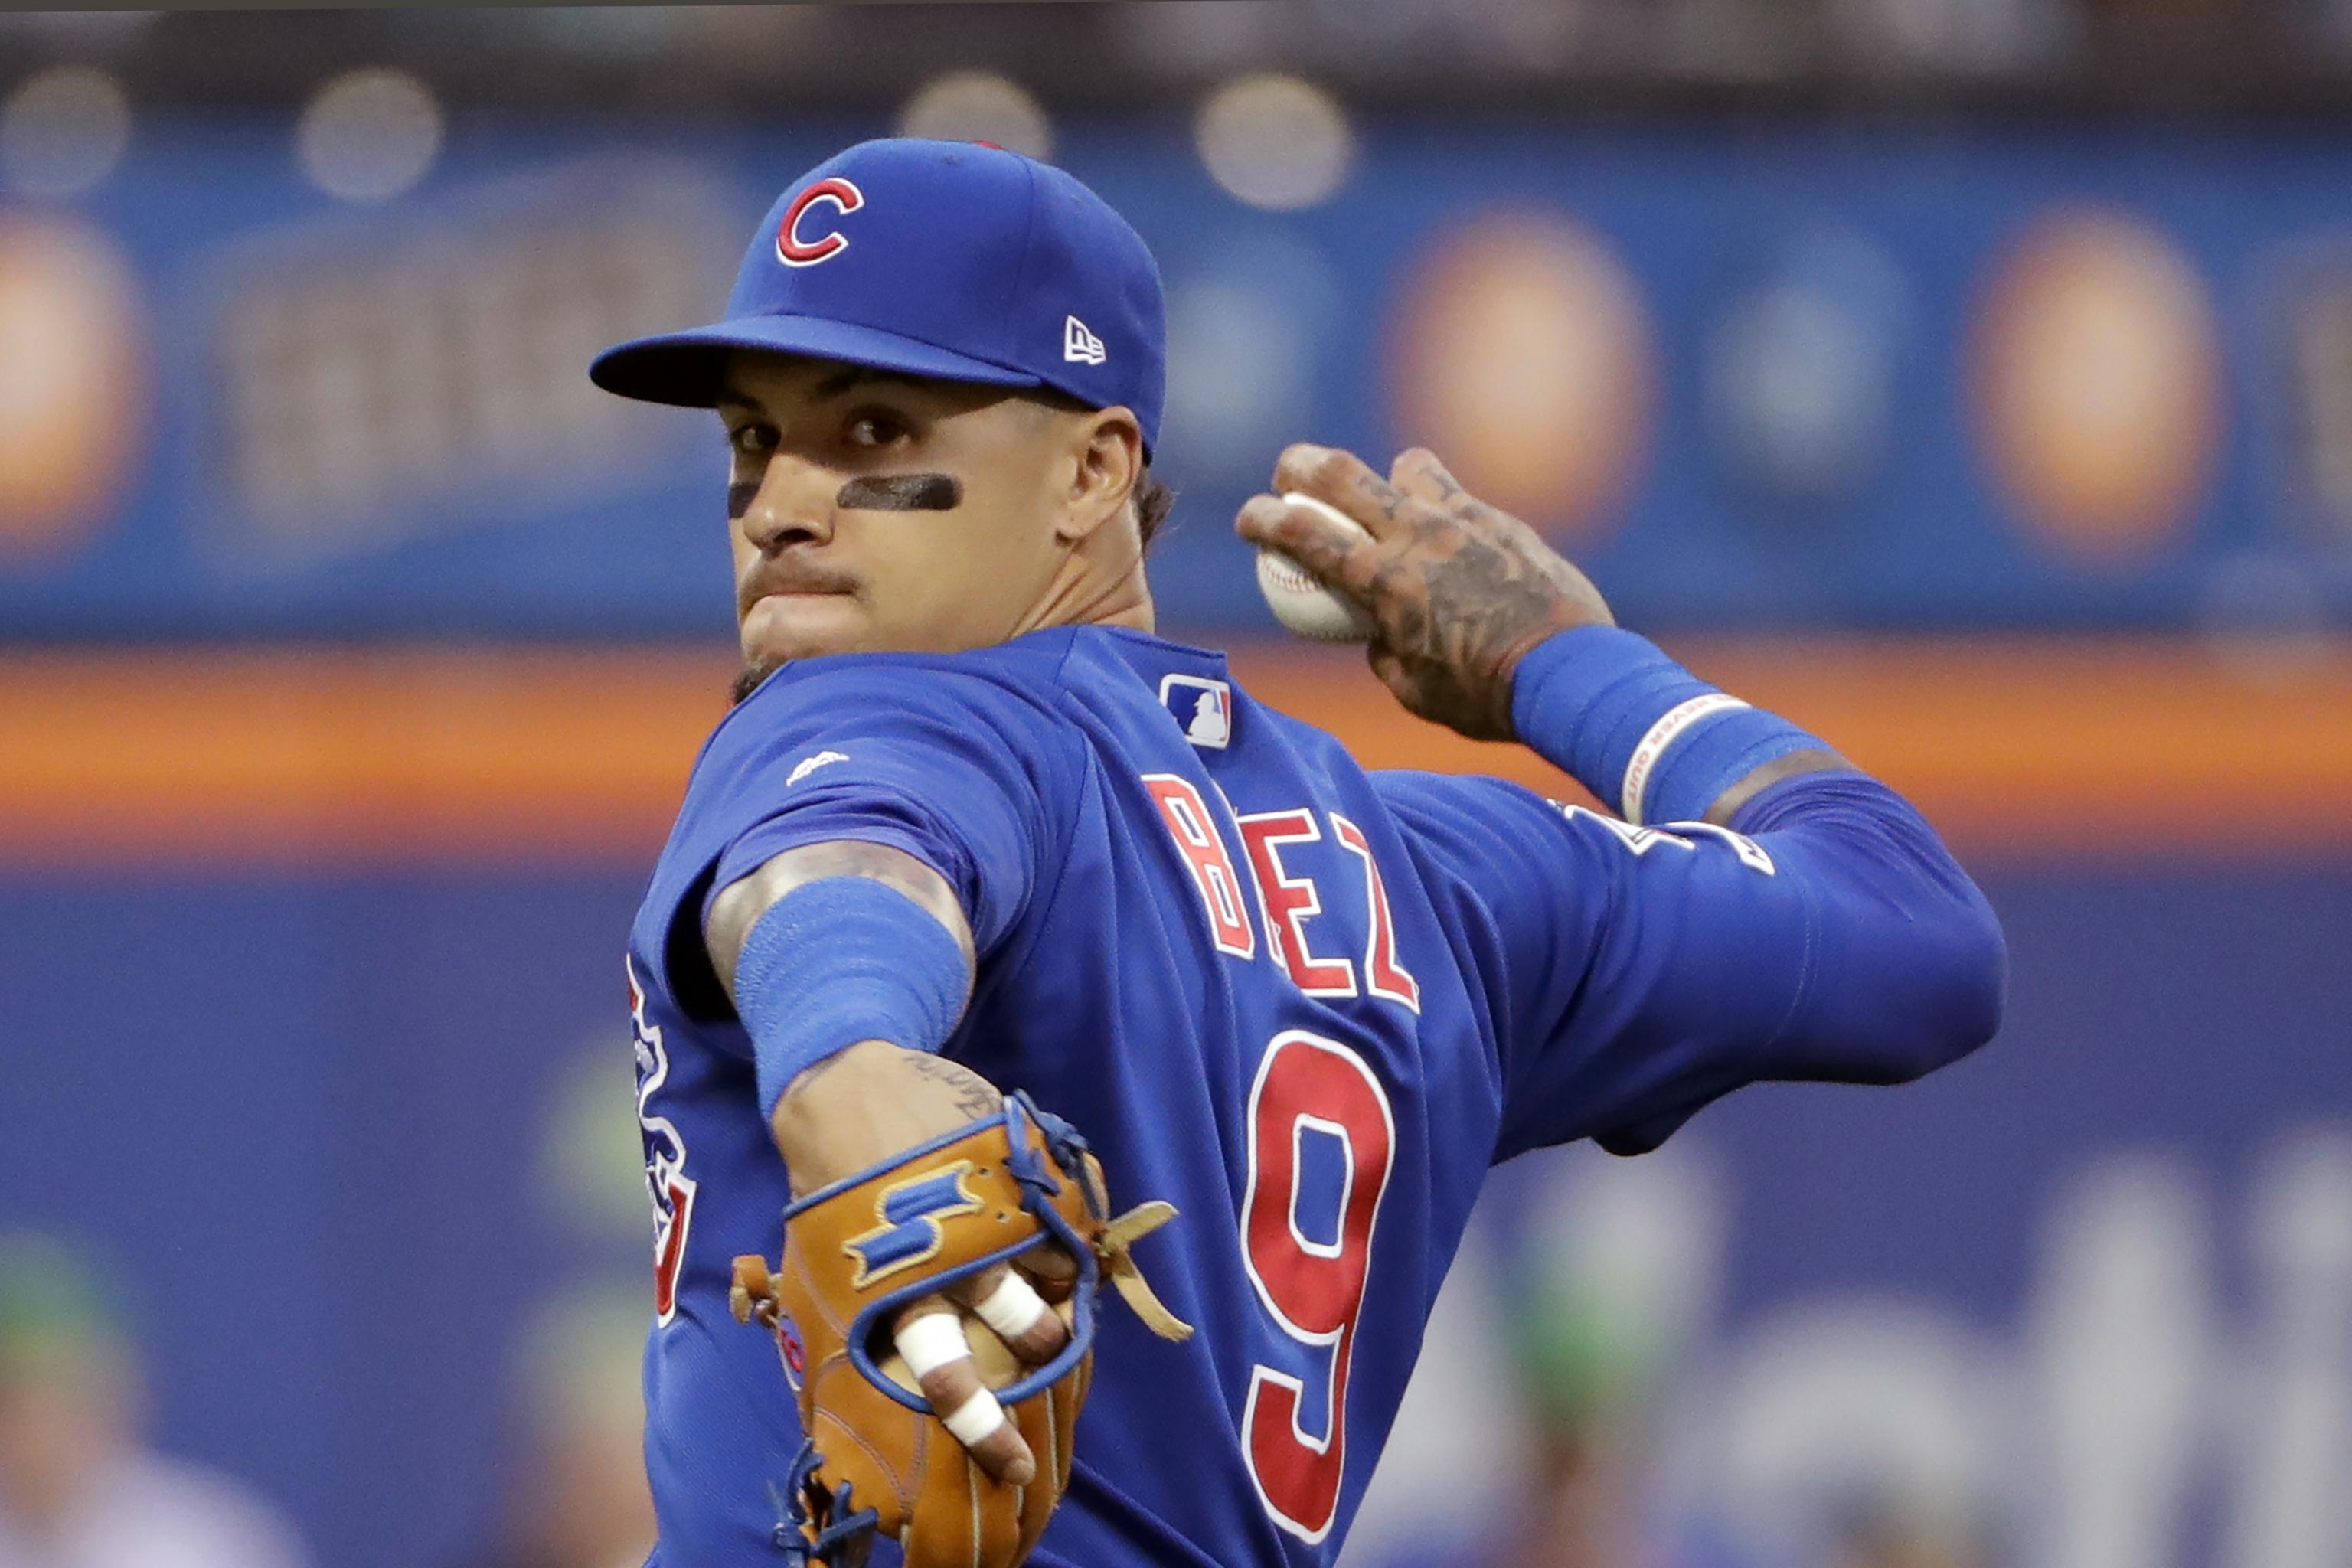 Cubs' Javy Baez is the only Chicago player with a best-selling